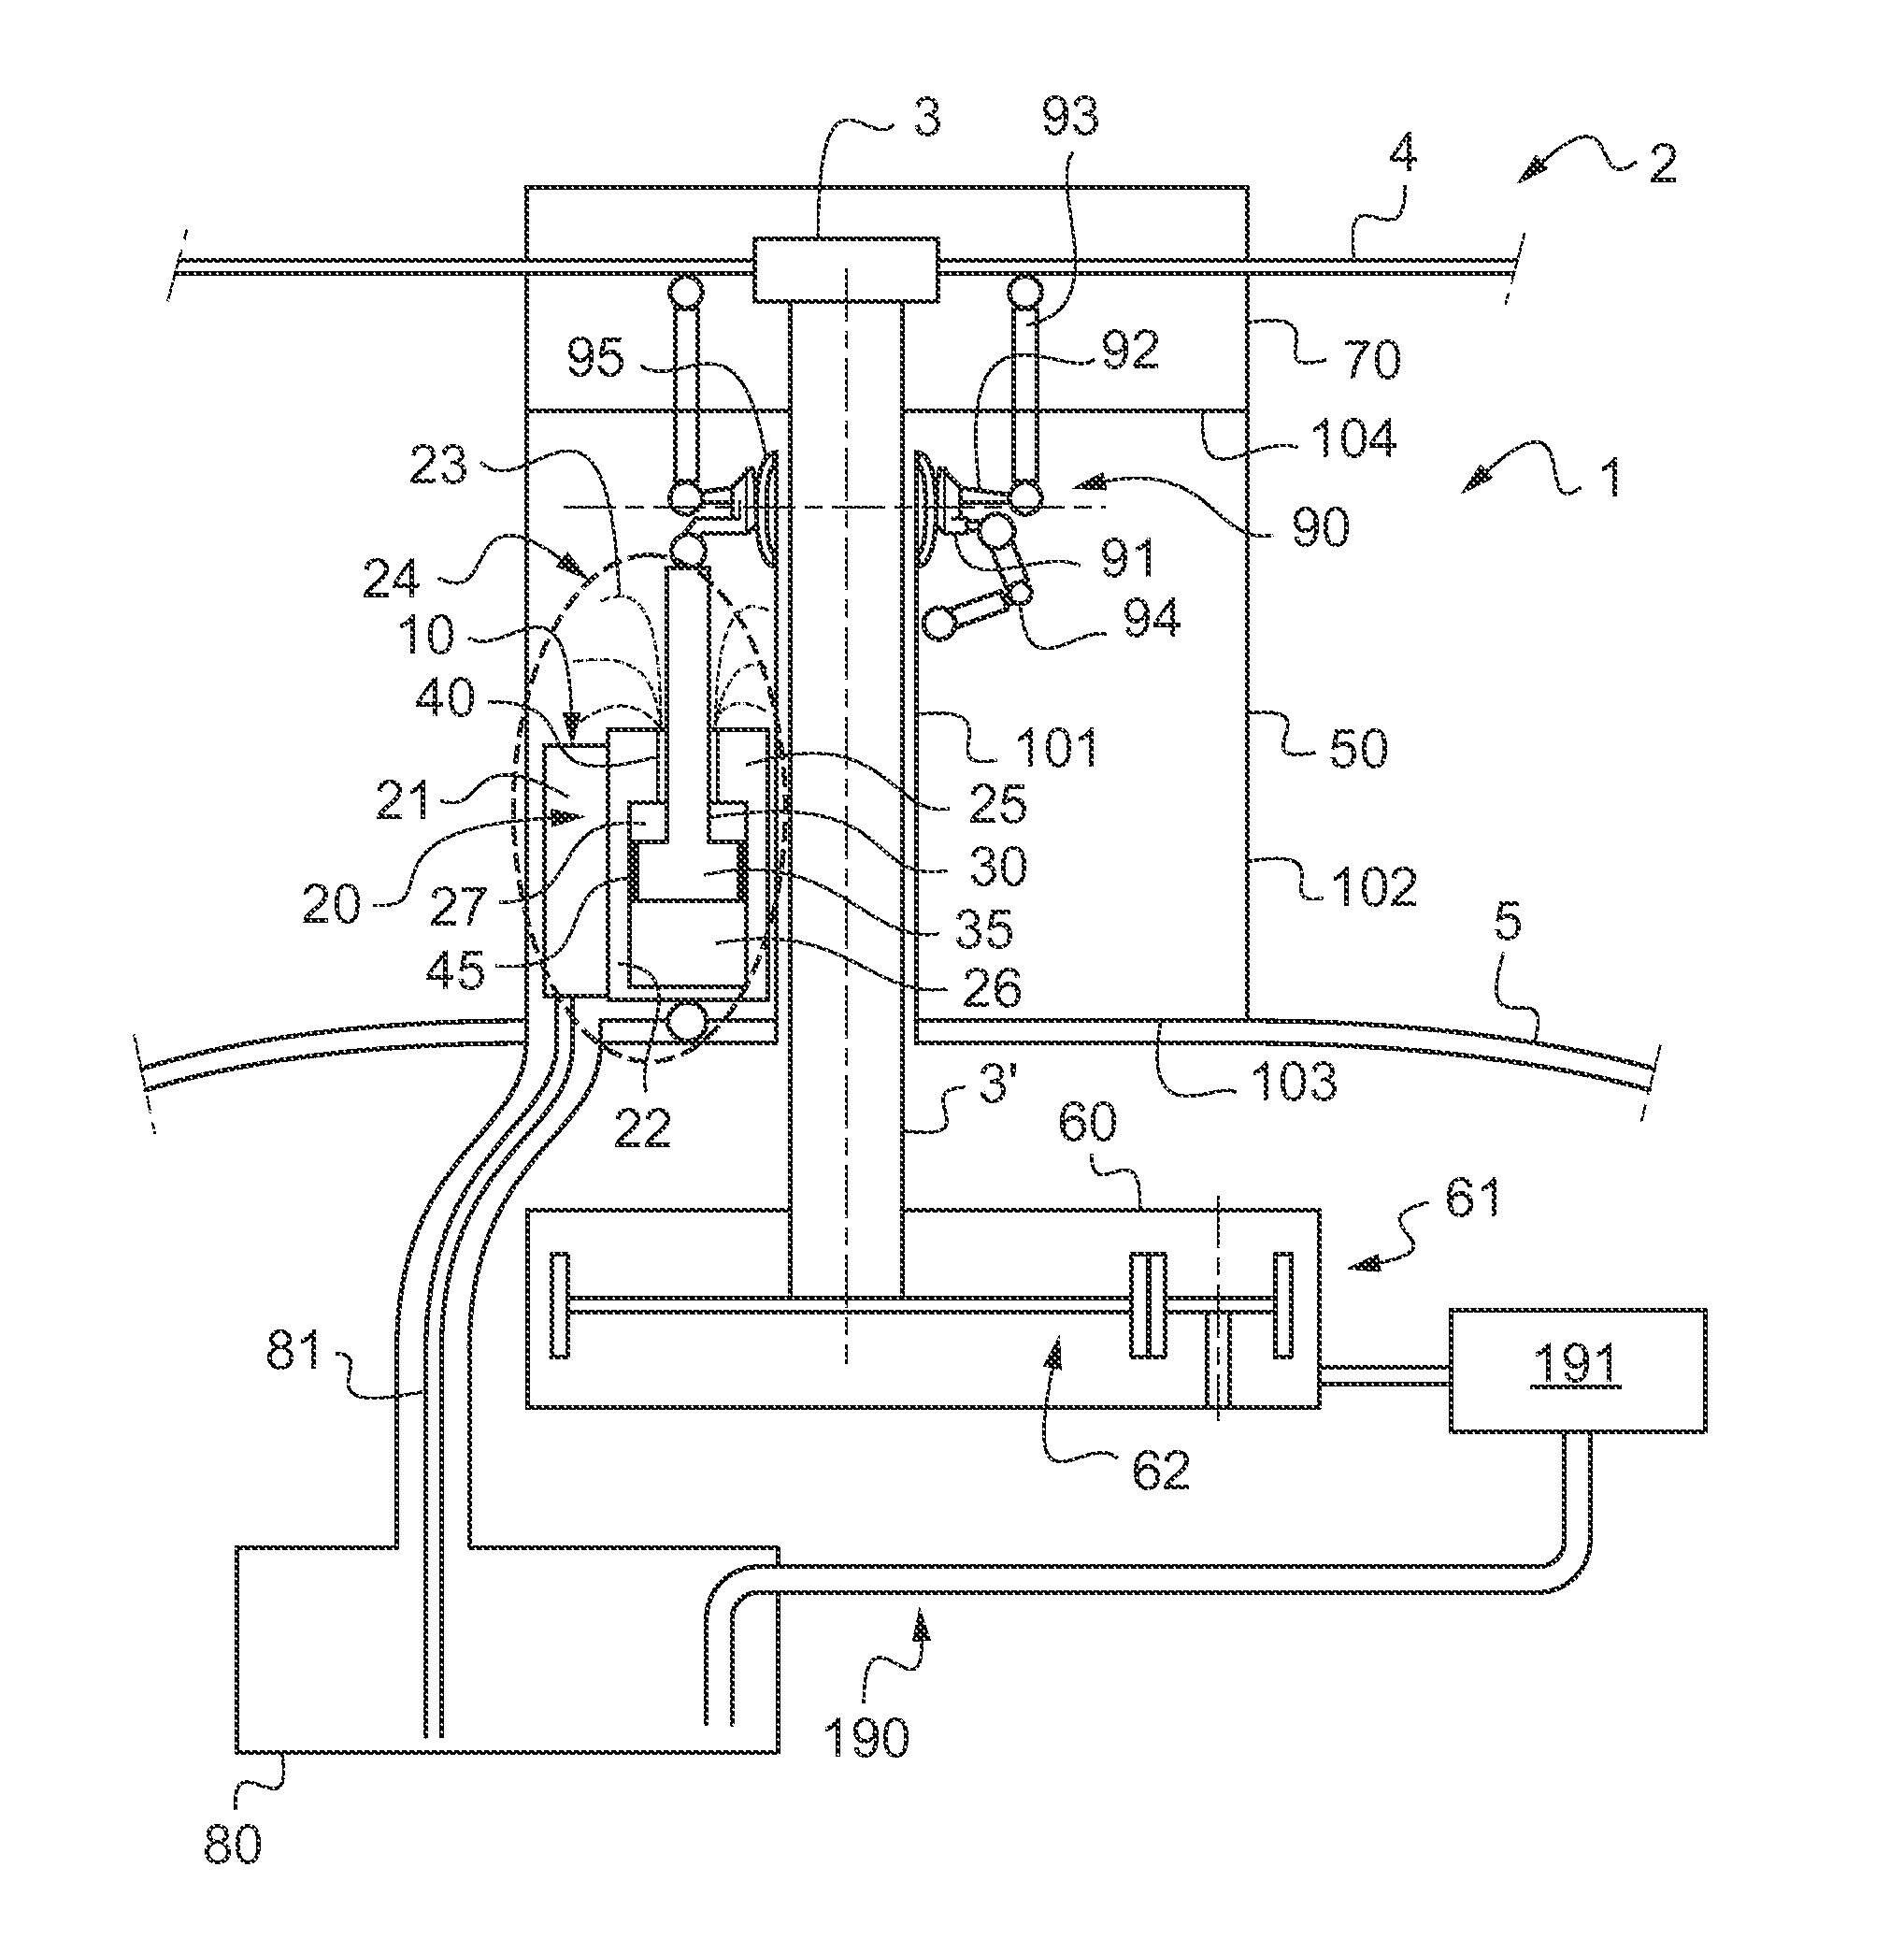 Aircraft hydraulic system comprising at least one servo-control, and an associated rotor and aircraft